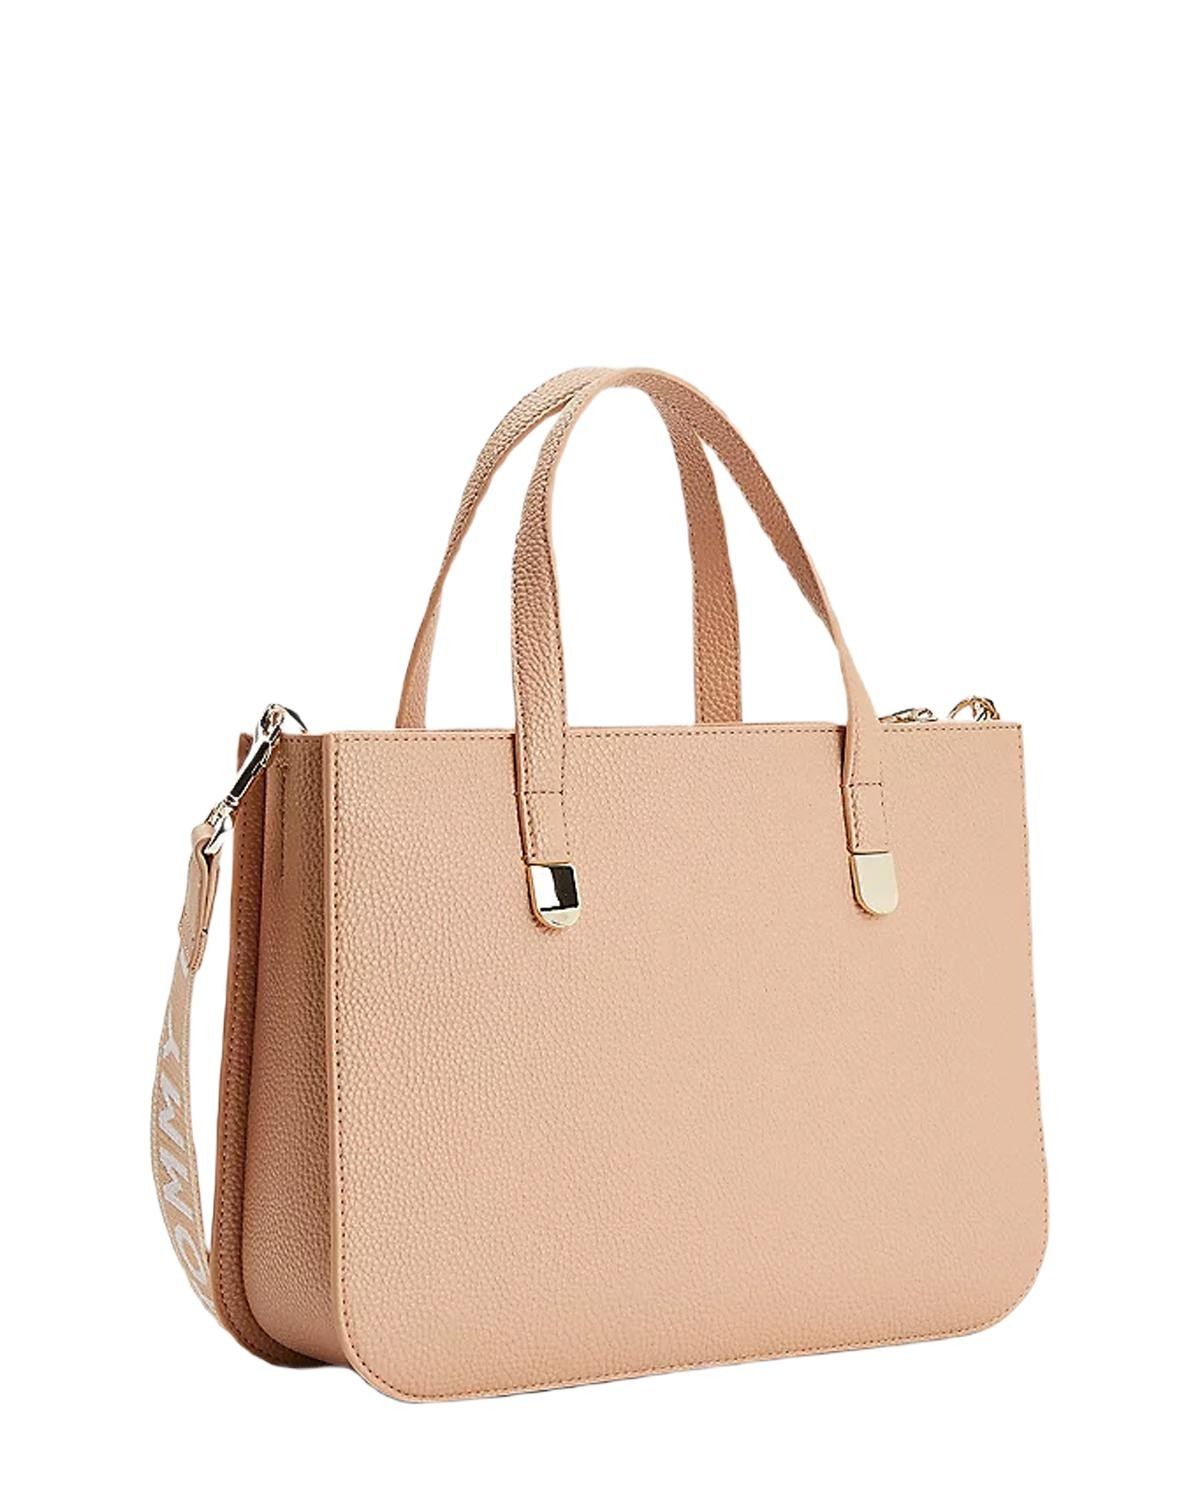 Brand: Tommy Hilfiger Gender: Women Type: Bags Season: Spring/Summer  PRODUCT DETAIL • Color: pink • Pattern: plain • Fastening: with zip • Size (cm): 23x31x9cm  • Details: -handbag -with shoulder strap   COMPOSITION AND MATERIAL • Composition: -100%  polyurethane